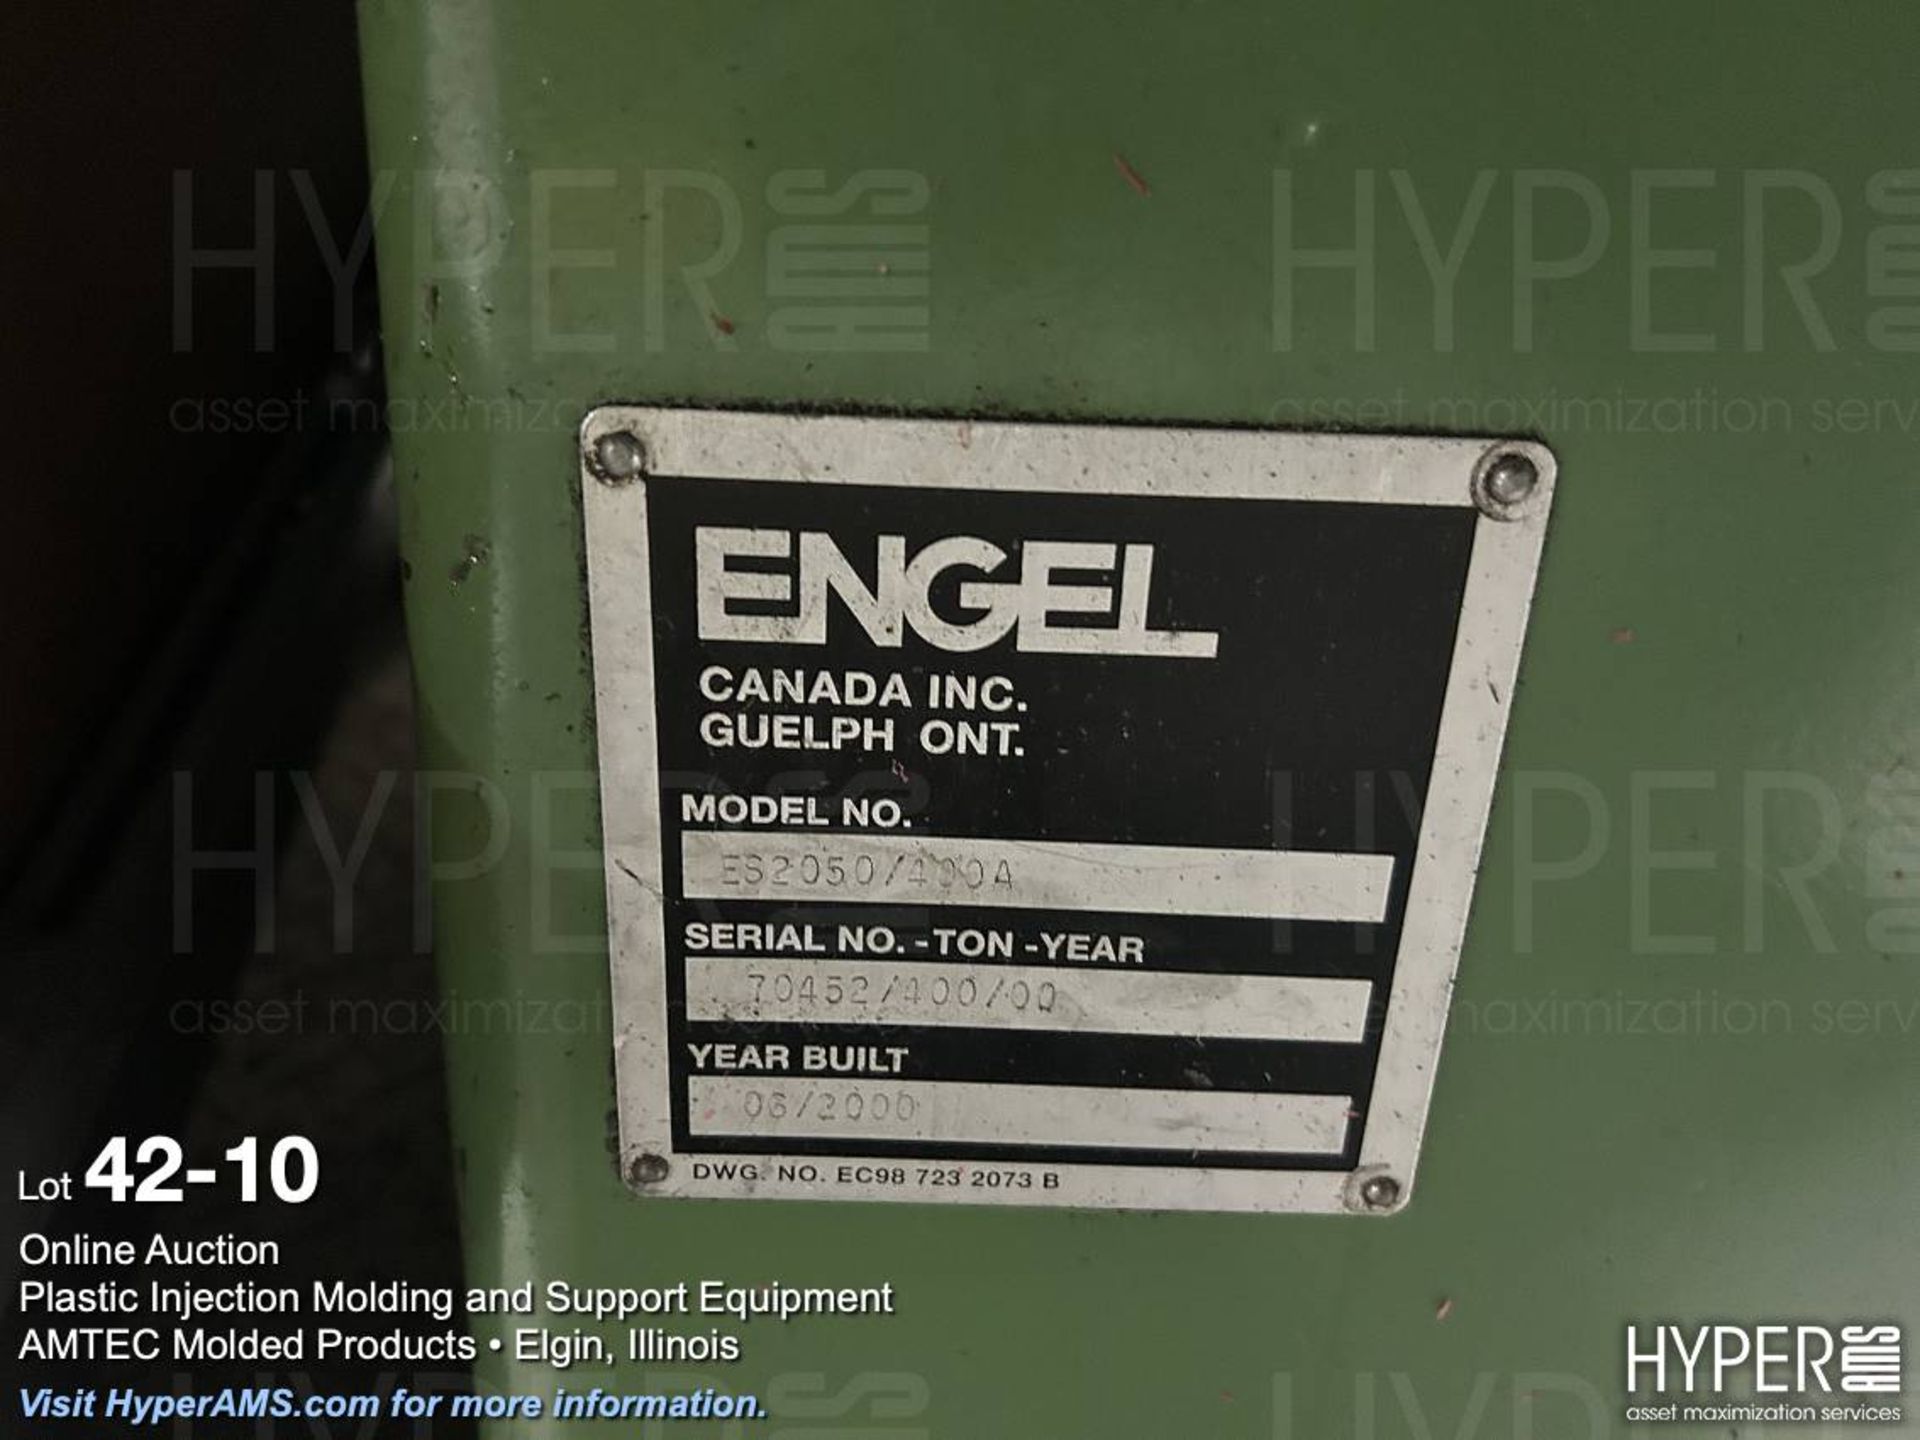 Engel ES2050/400AH toggle clamp plastic injection molding machine - Image 10 of 28